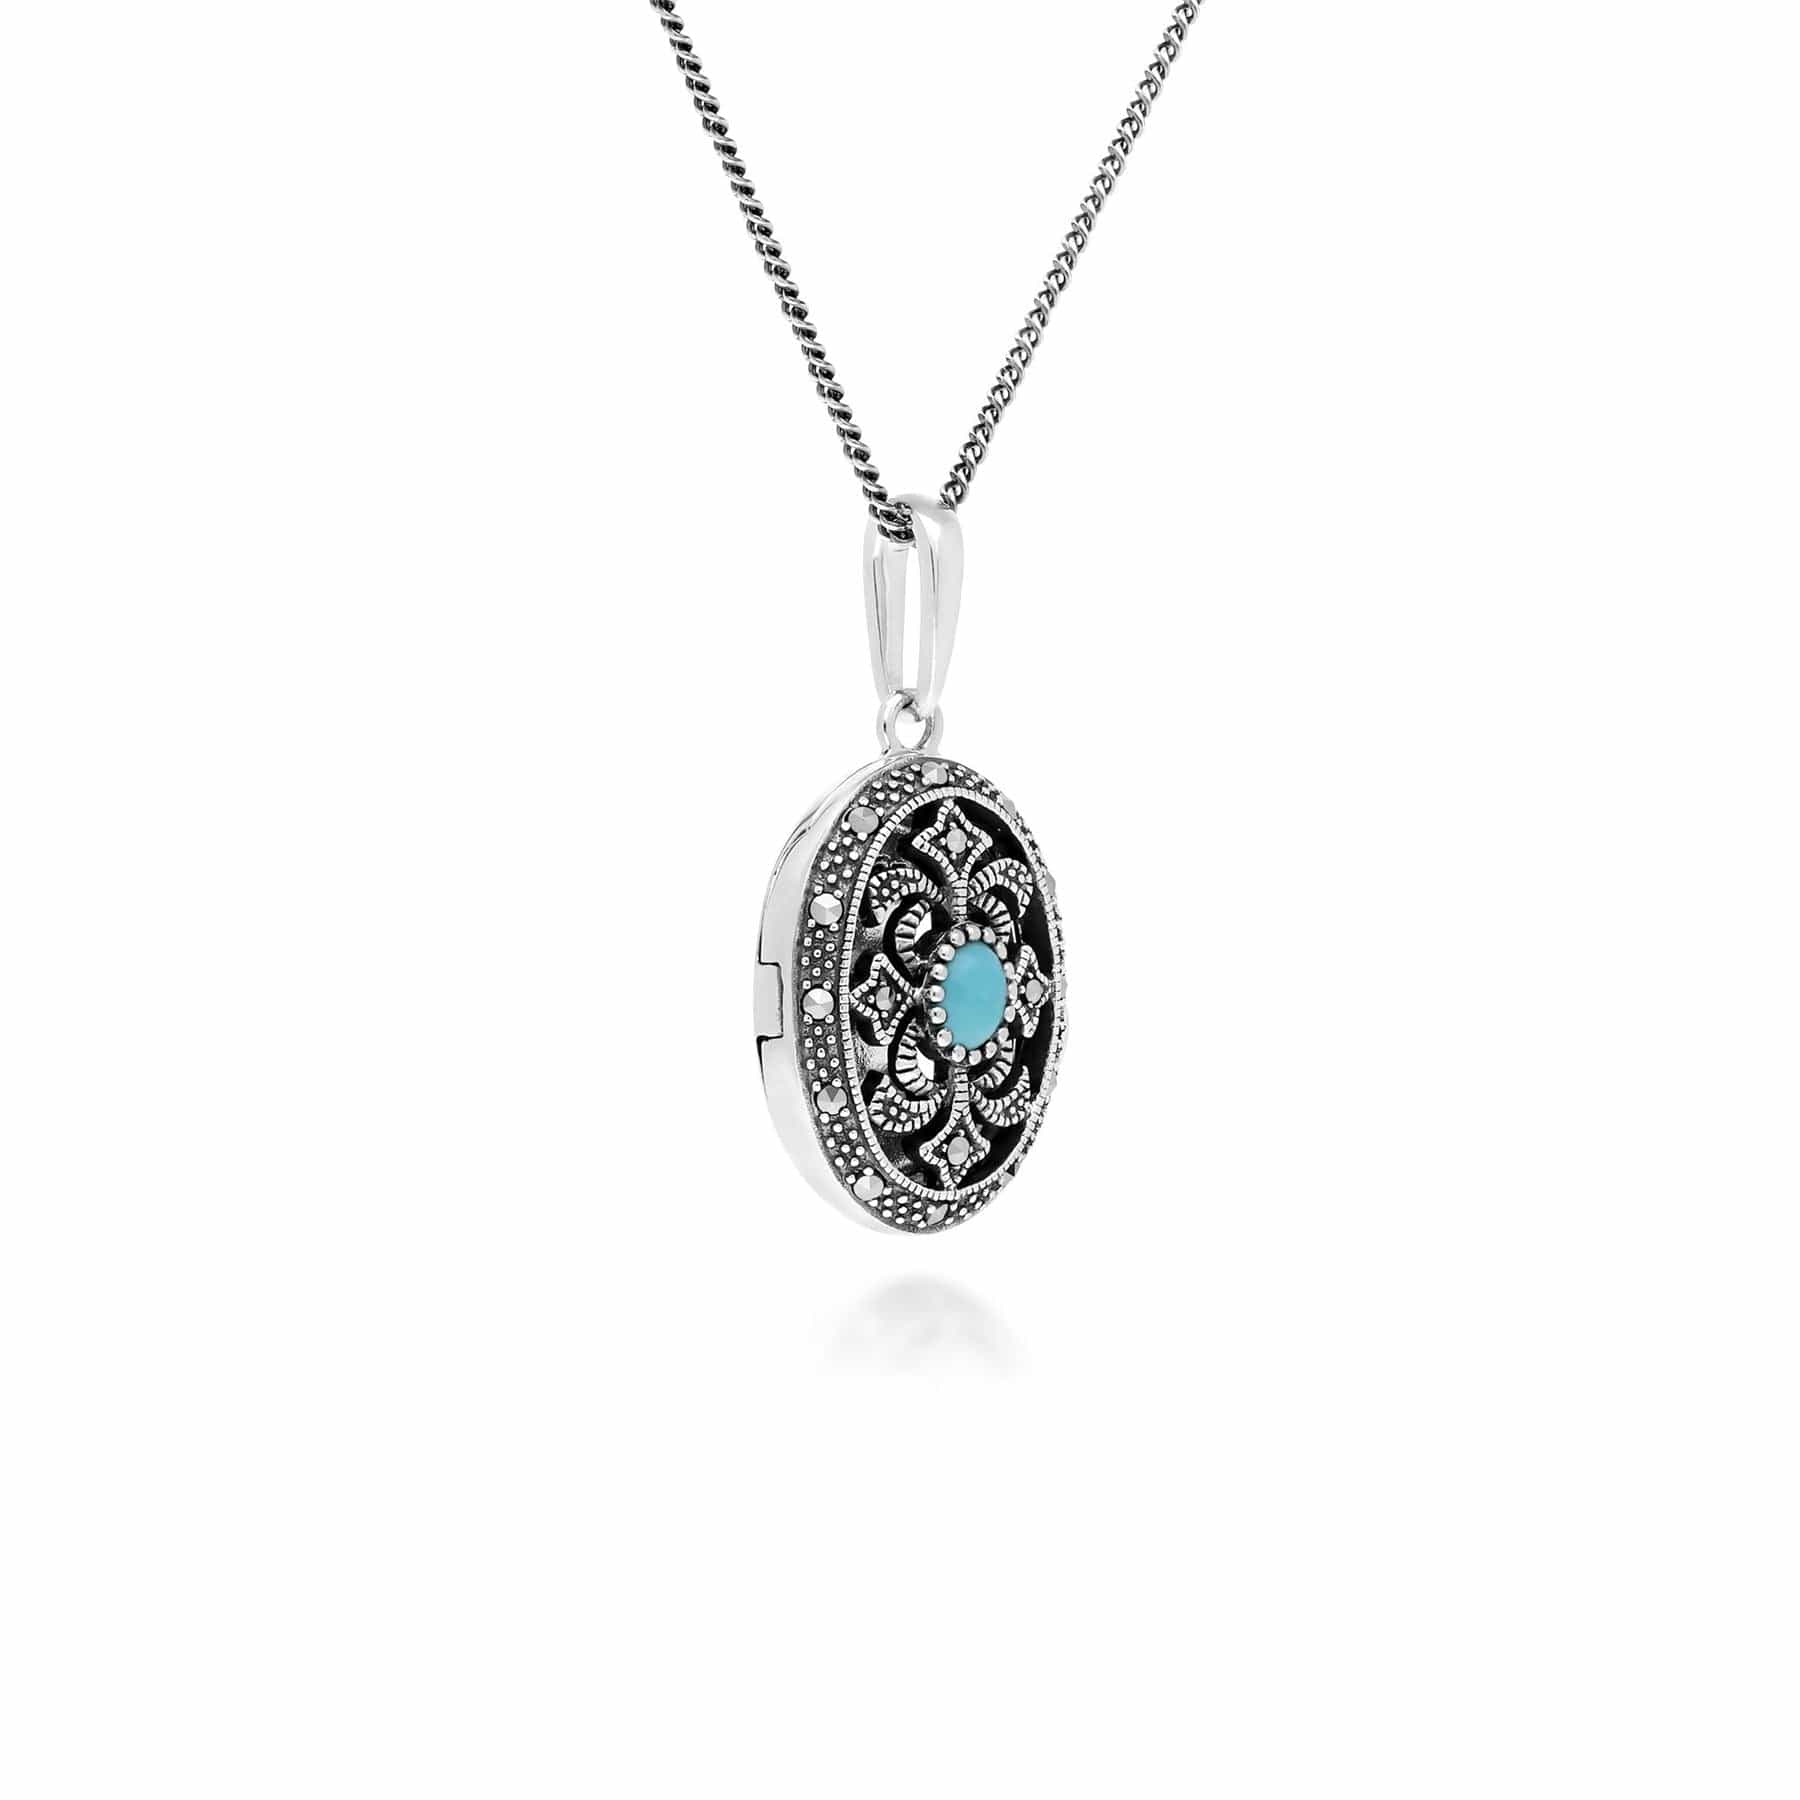 214N716213925 Art Nouveau Style Oval Turquoise & Marcasite Locket Necklace in 925 Sterling Silver 2